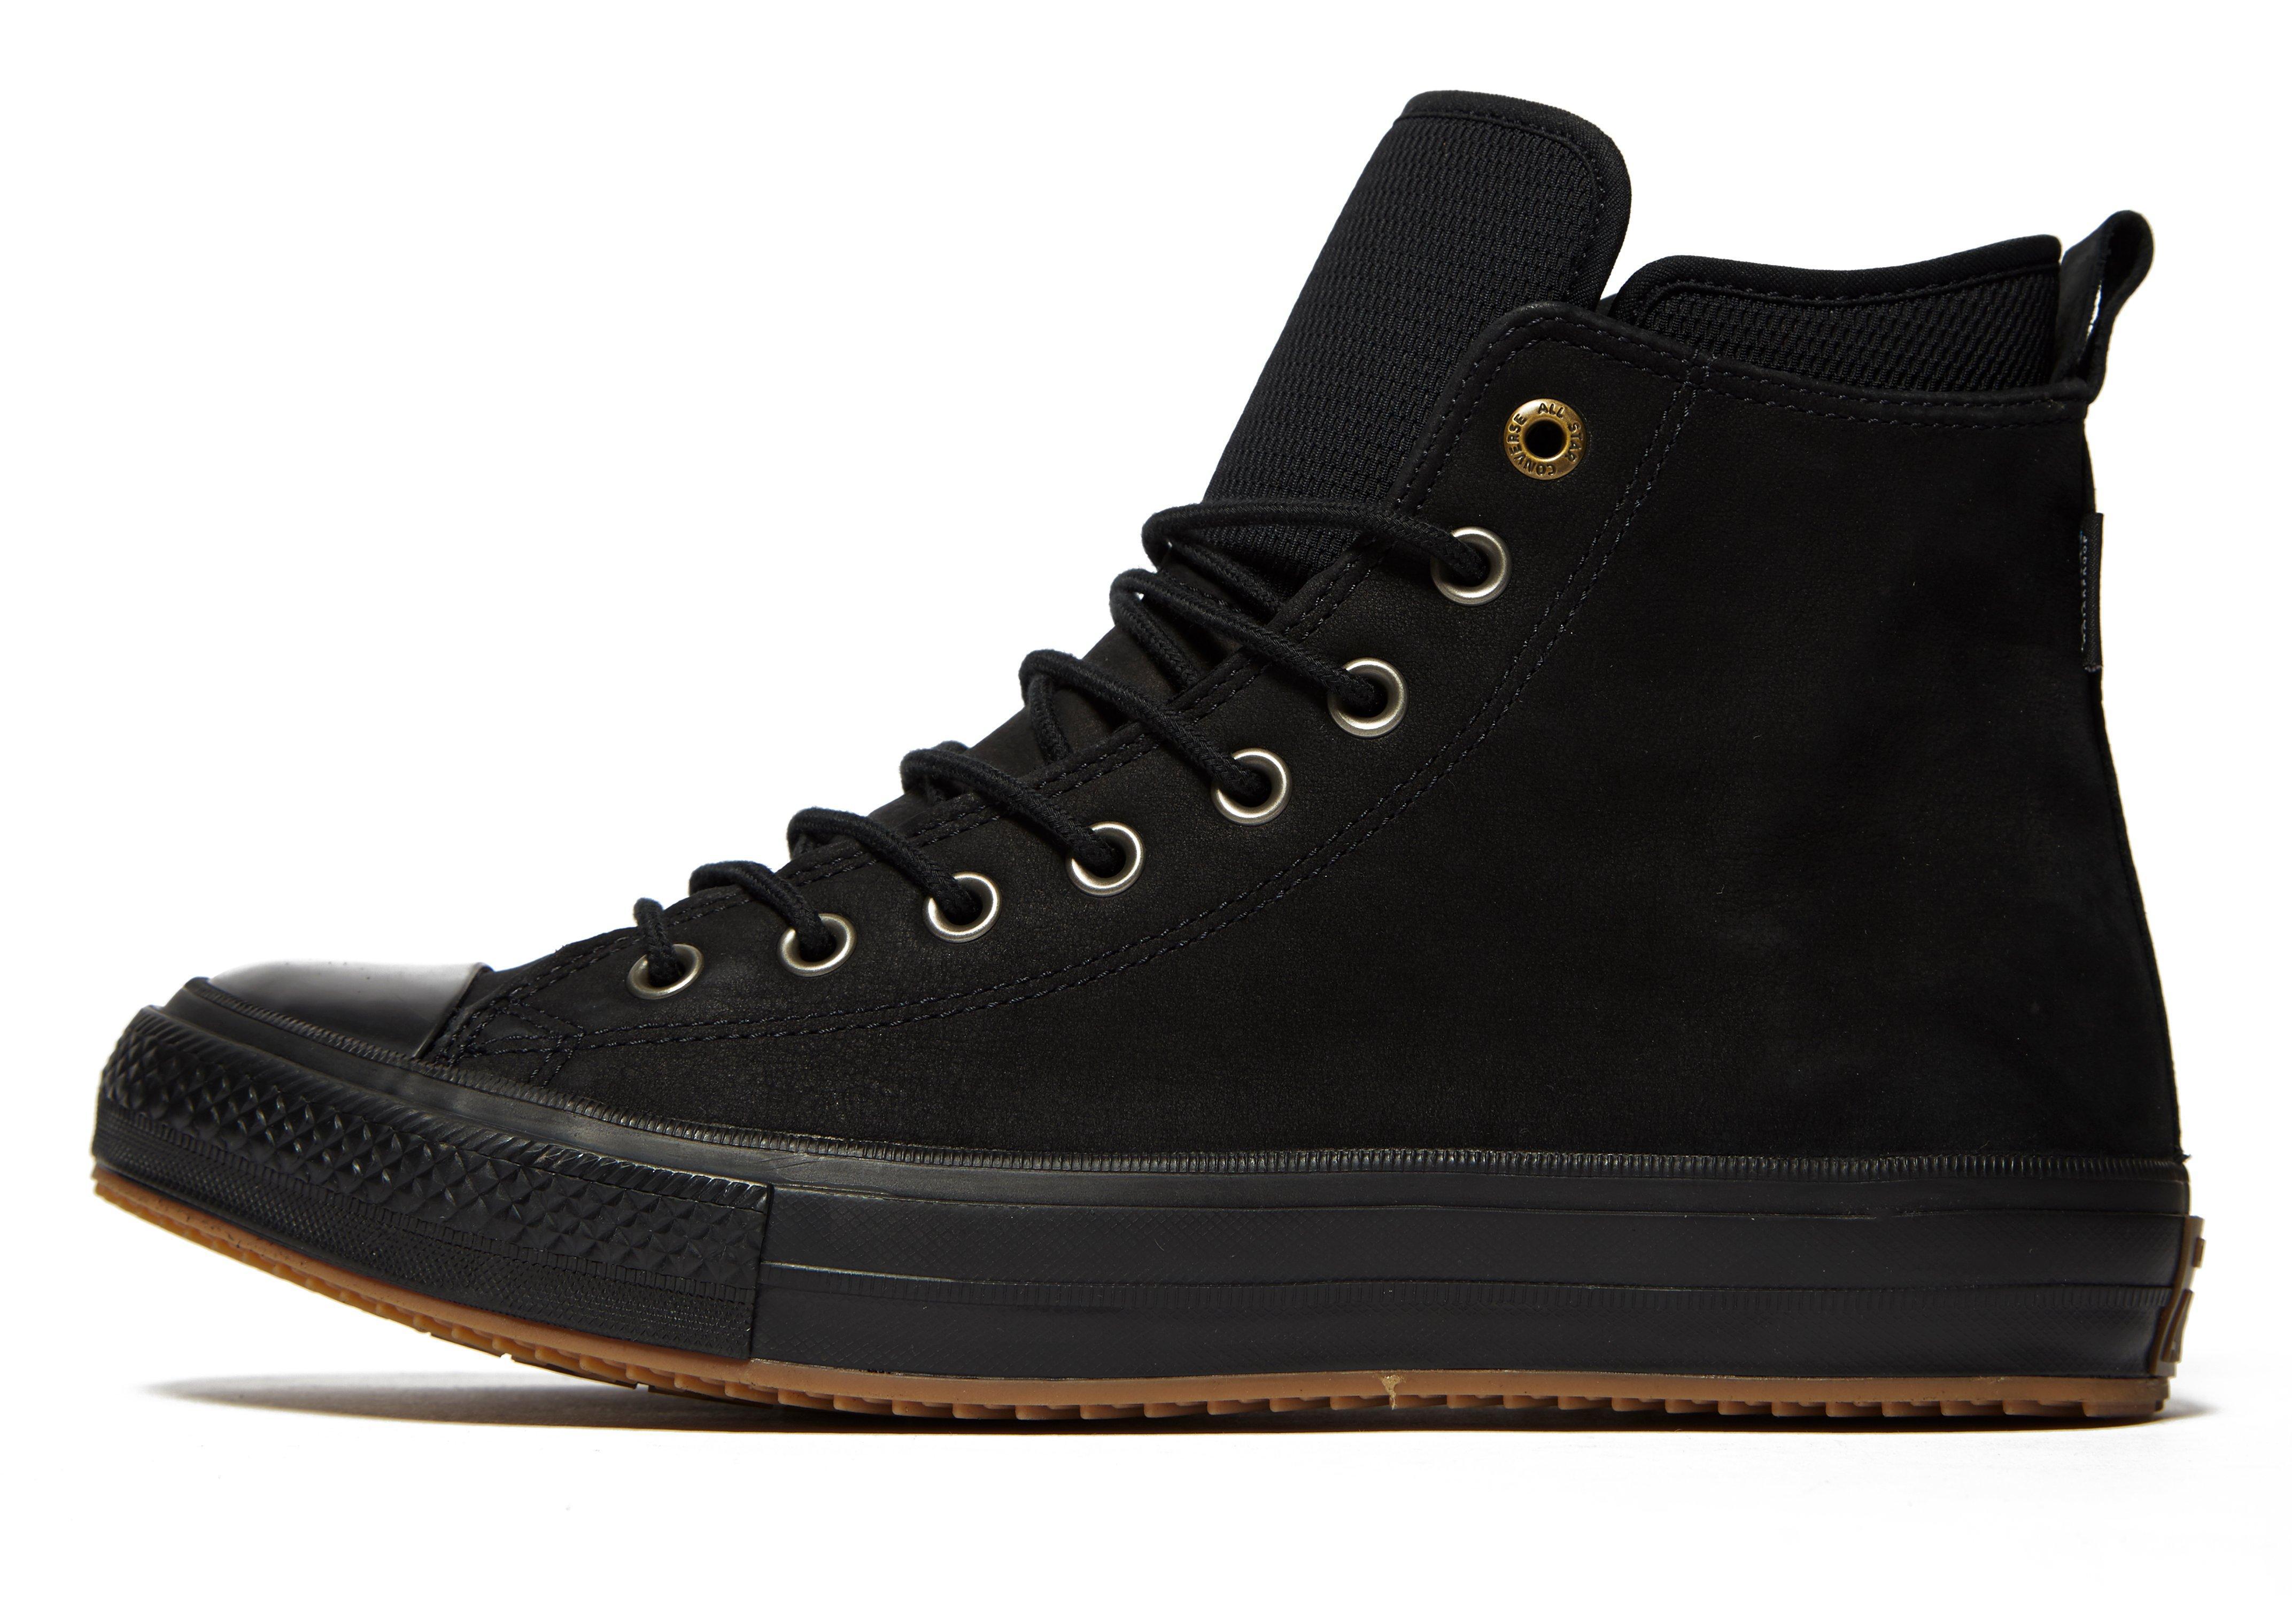 Lyst - Converse All Star Waterproof Boot High Top in Black for Men